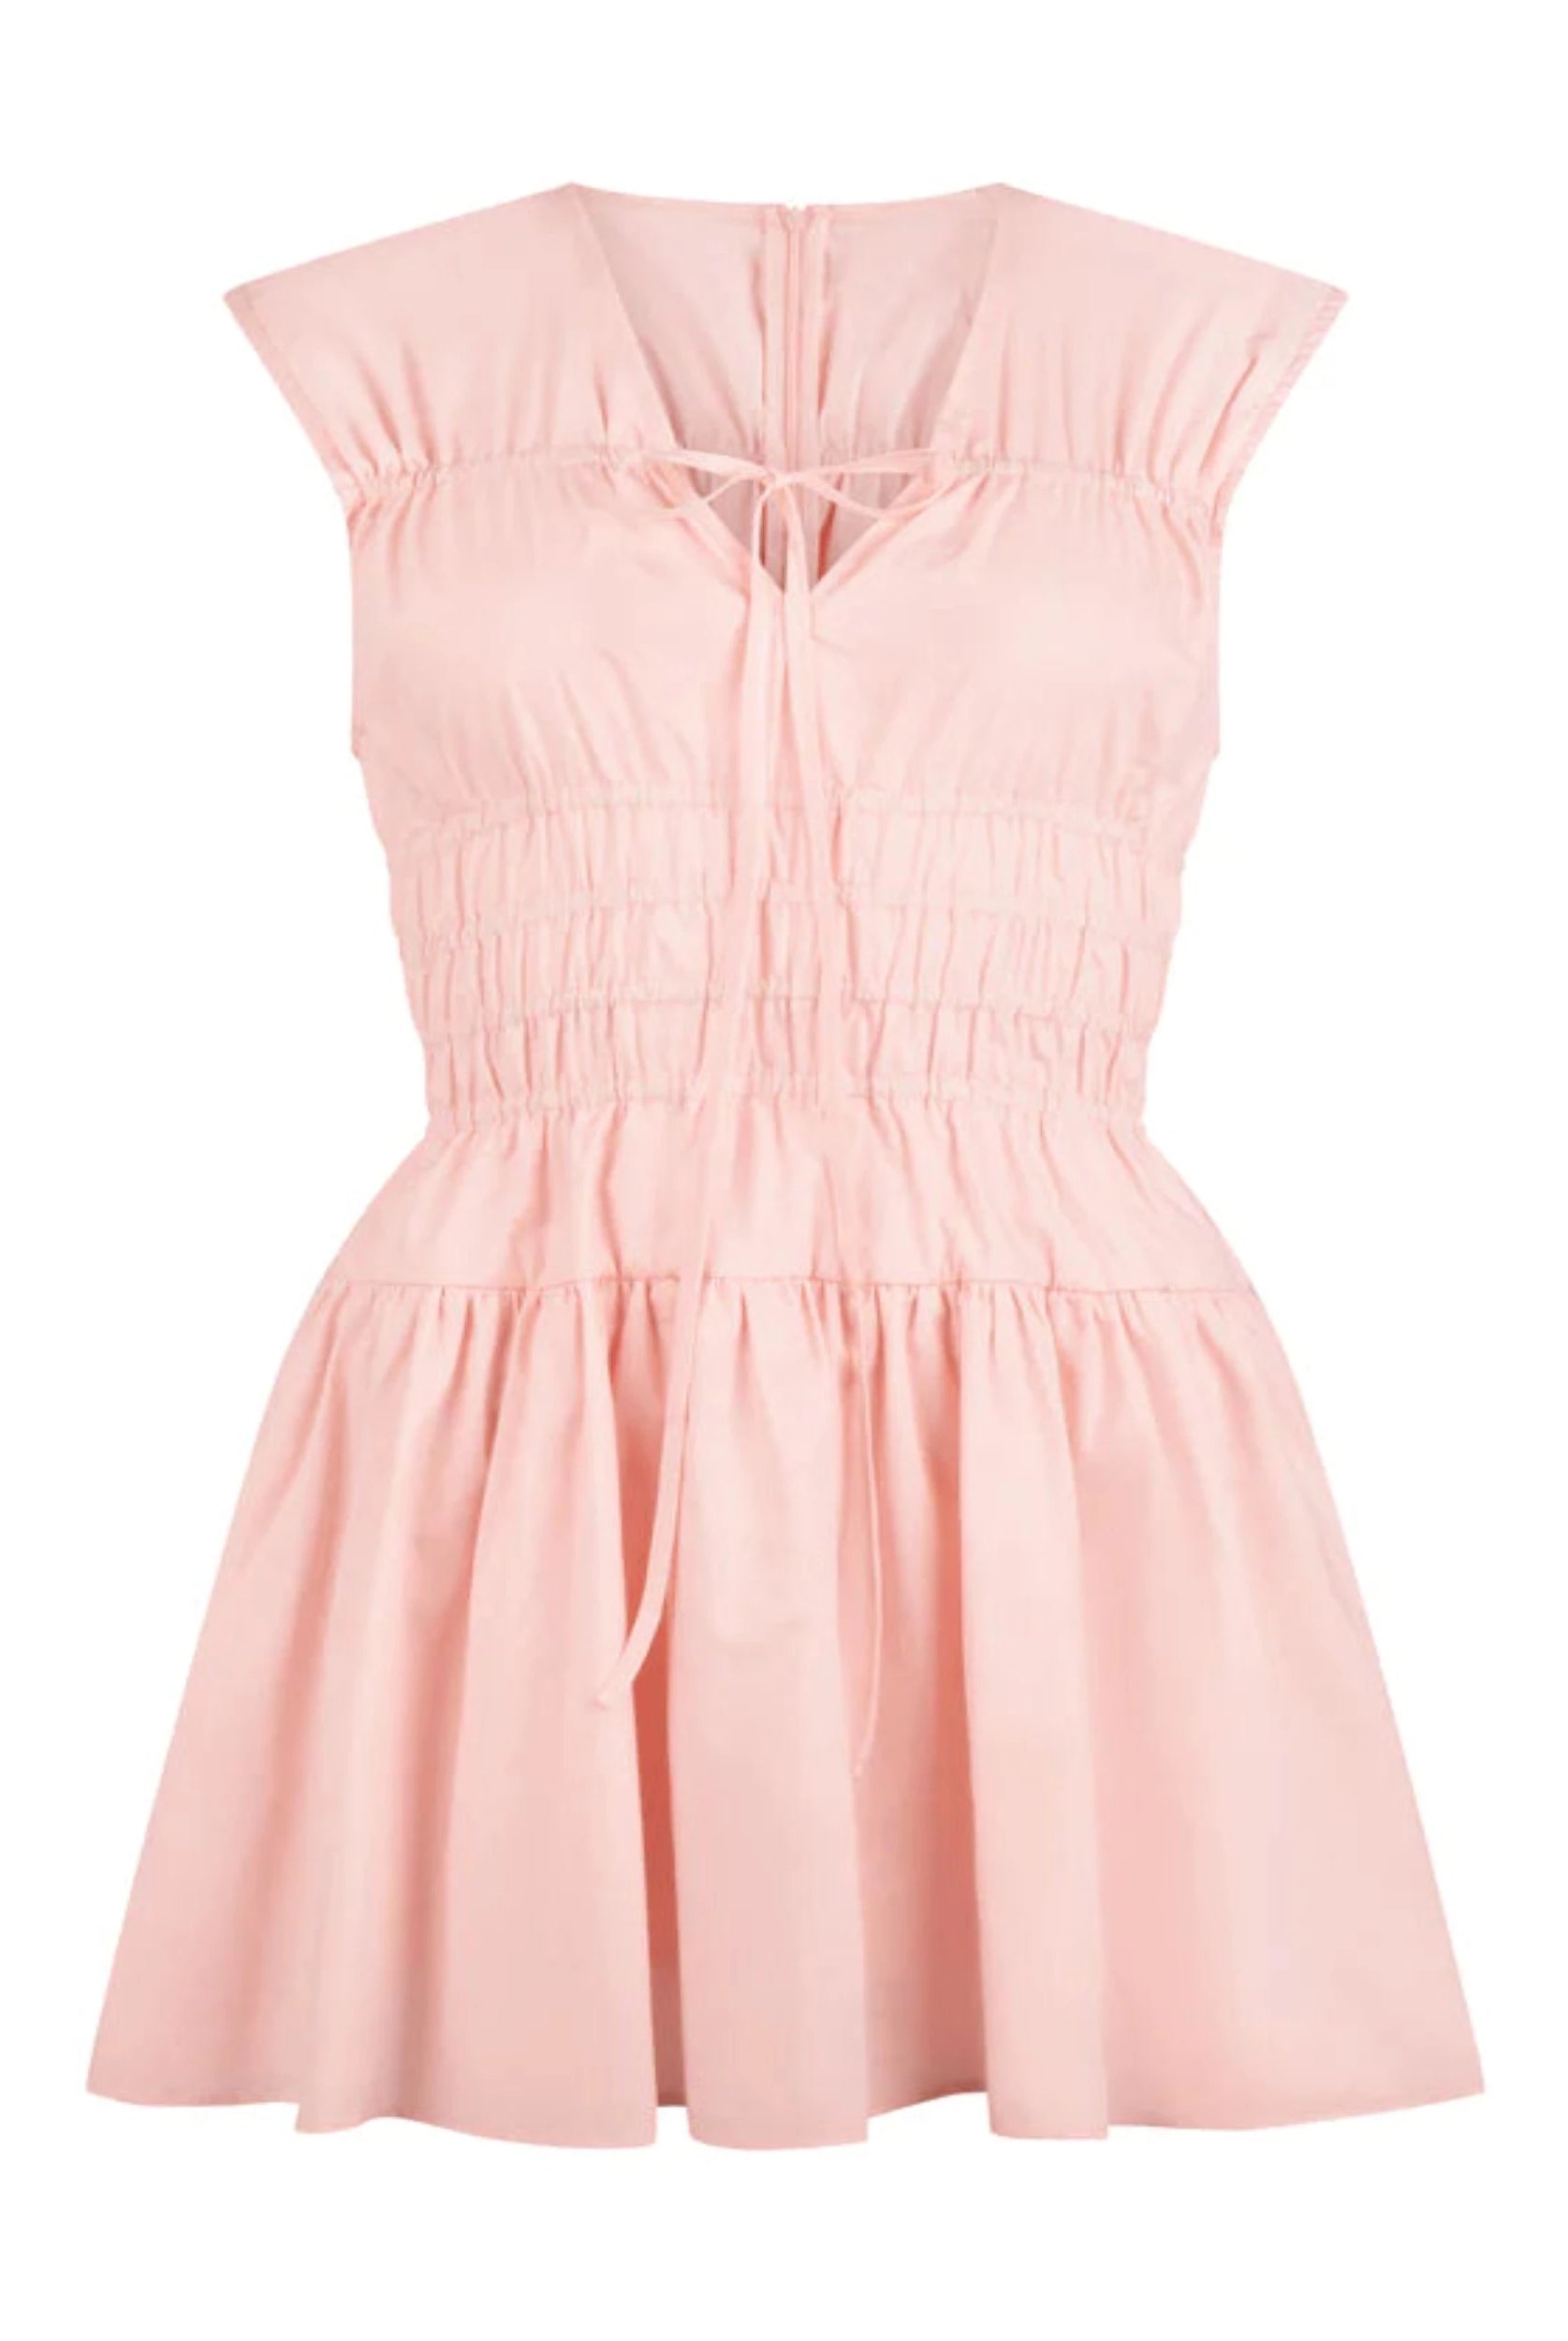 Pink A Line Cotton Dress from Araminta James